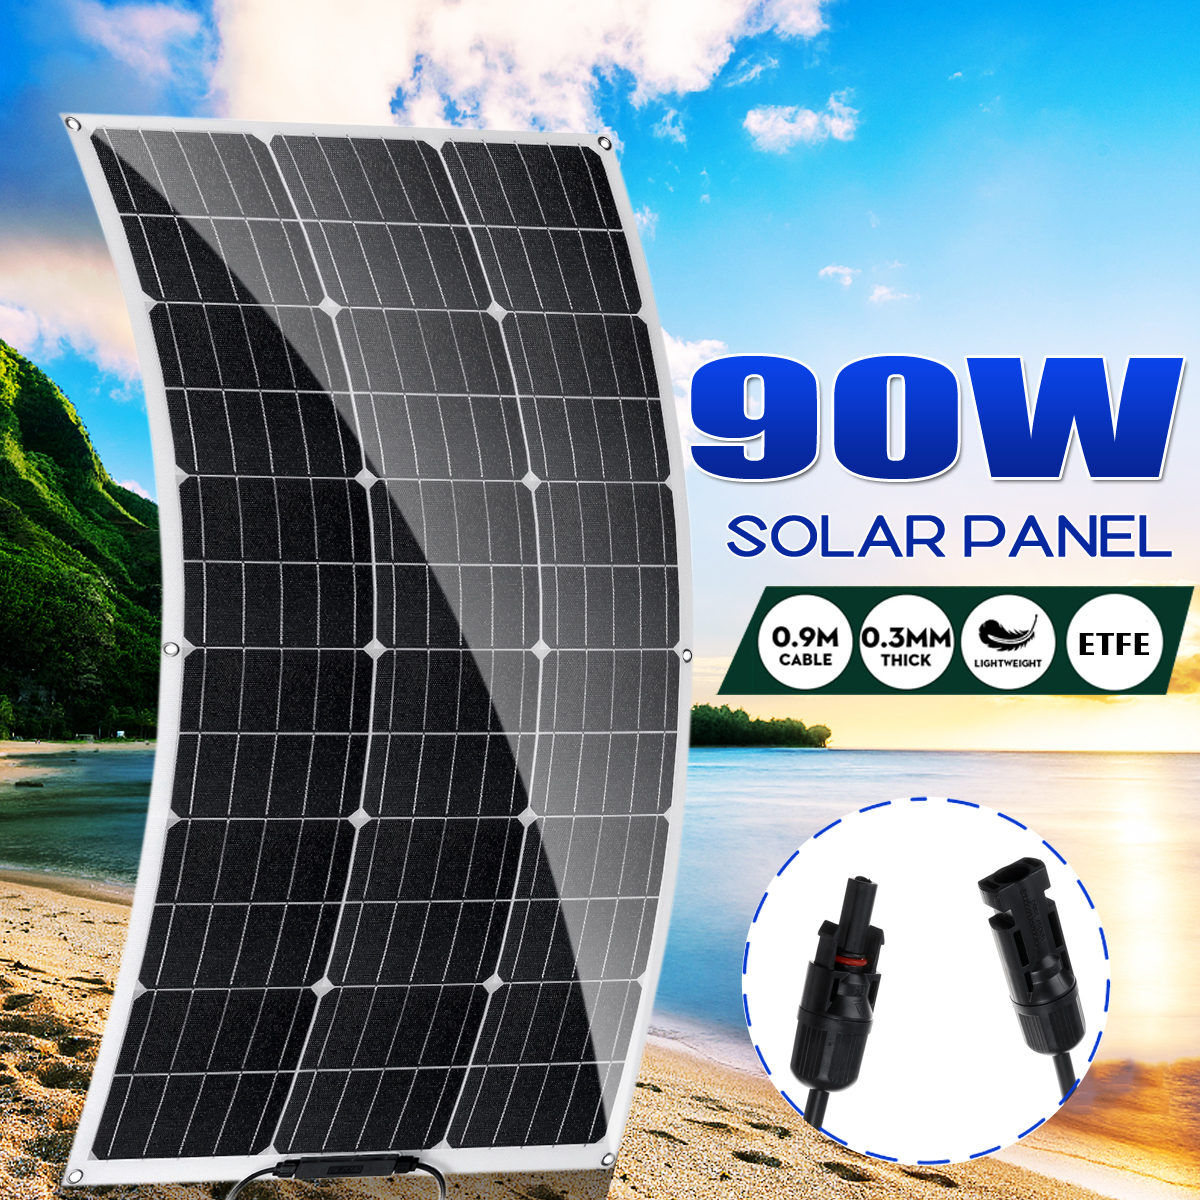 90W-18V-ETFE-Universal-Solar-Panel-Battery-Charger-Power-Charge-Kit-For-RV-Car-Boat-Camping-1721129-1